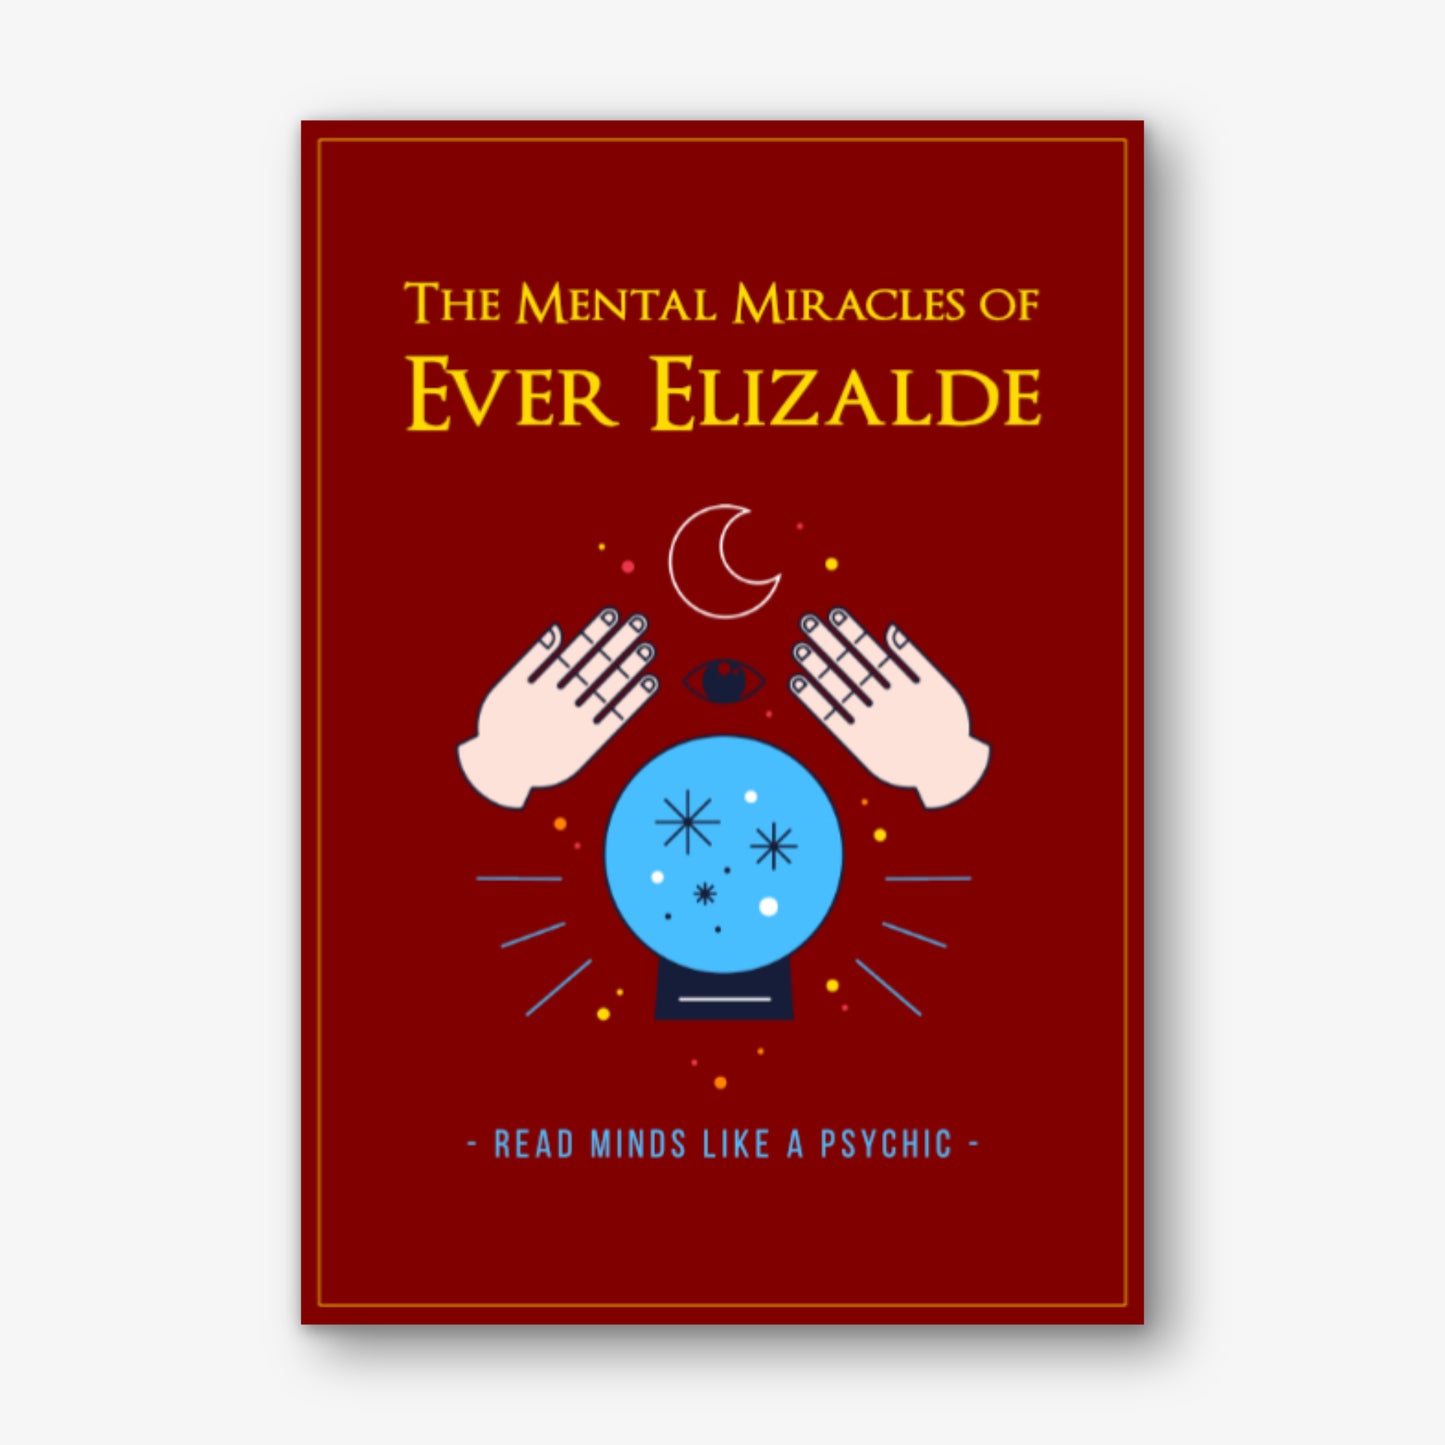 The Mental Miracles by Ever Elizalde